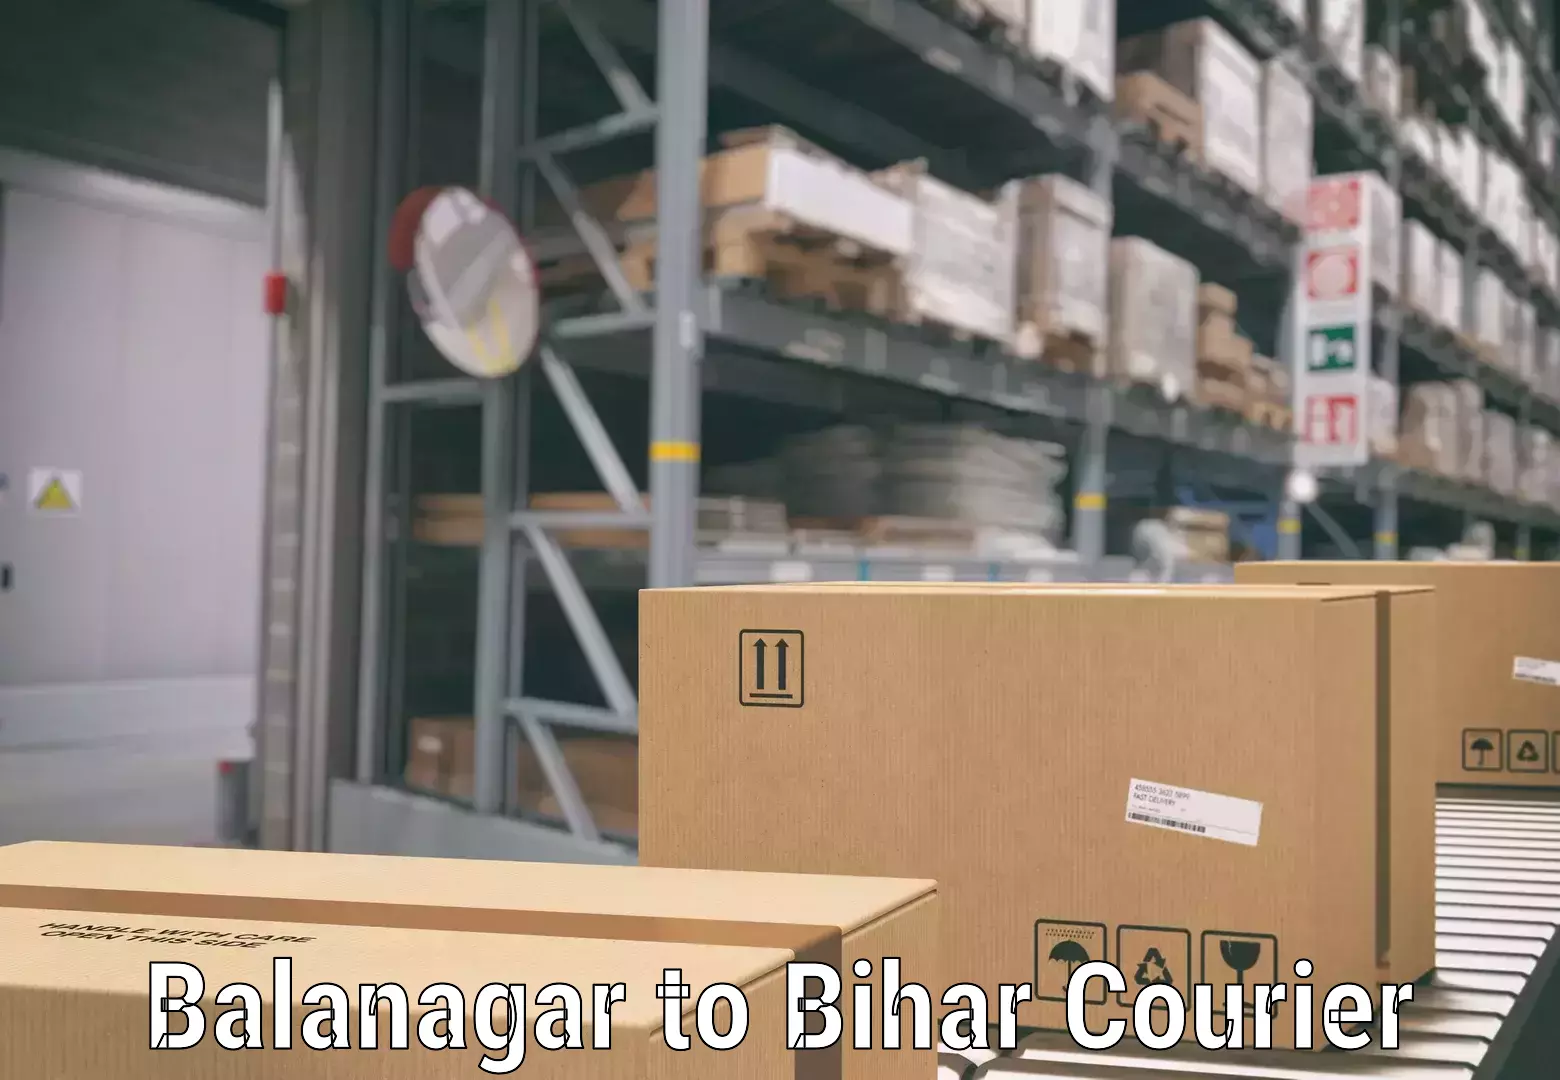 Instant baggage transport quote Balanagar to Rajpur